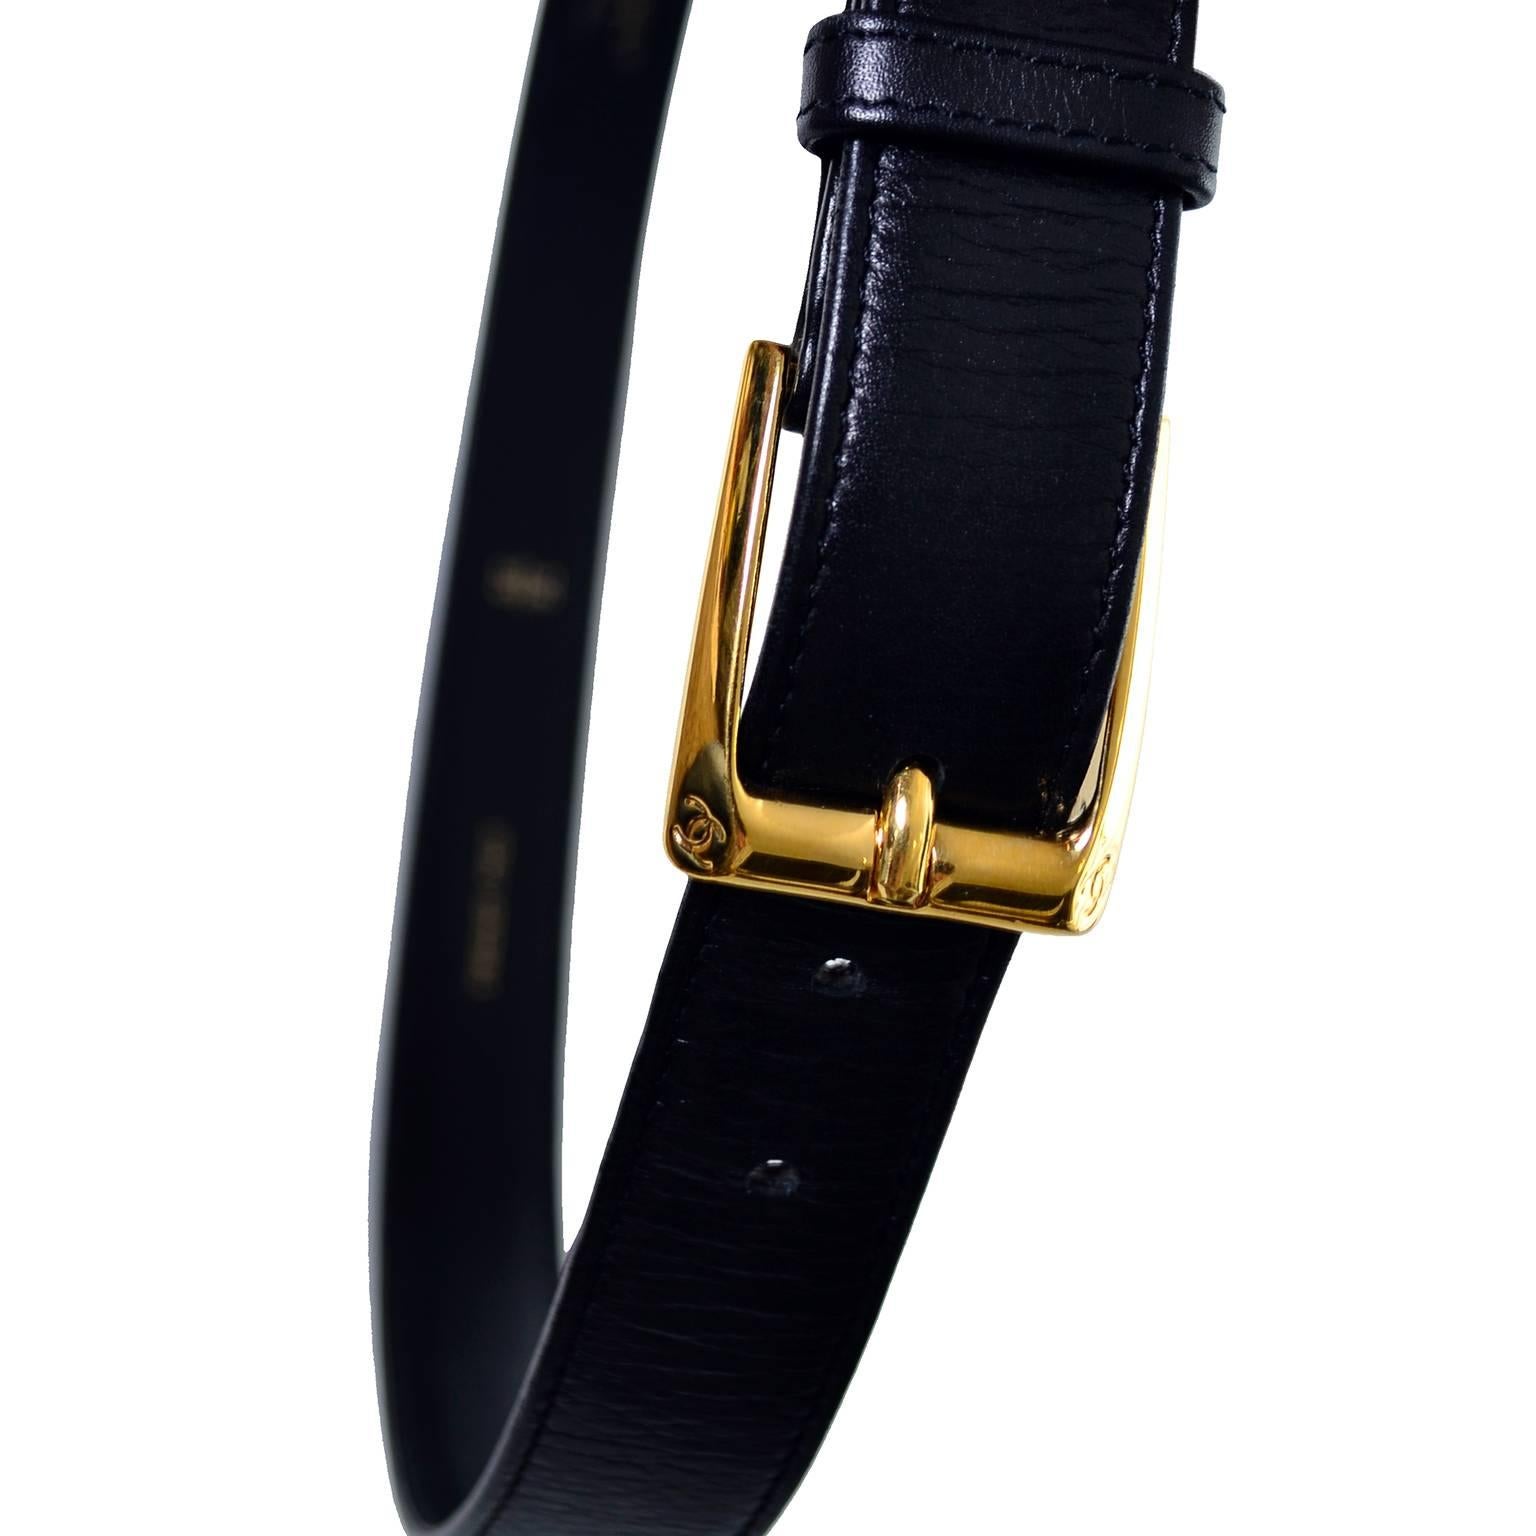 This vintage black leather Chanel belt is timeless. The gold buckle is marked with the Chanel interlocking C logo on both edges and the belt itself is marked CHANEL 98 with the logo and the letter A made in France Veau Veritable and the size 75/30.